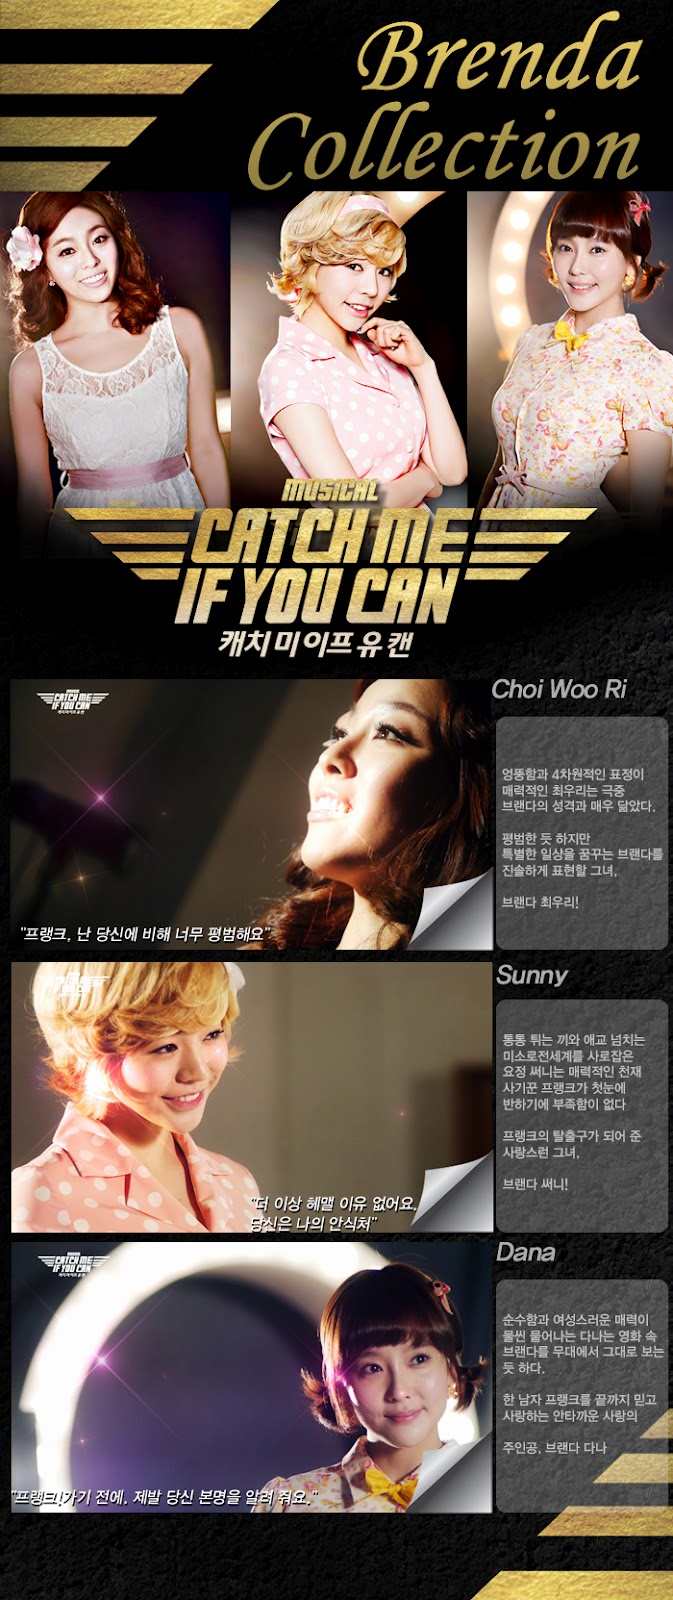 Sunny Catch My If You Can Promotional Picture C6b193e3-9-brenda-collection